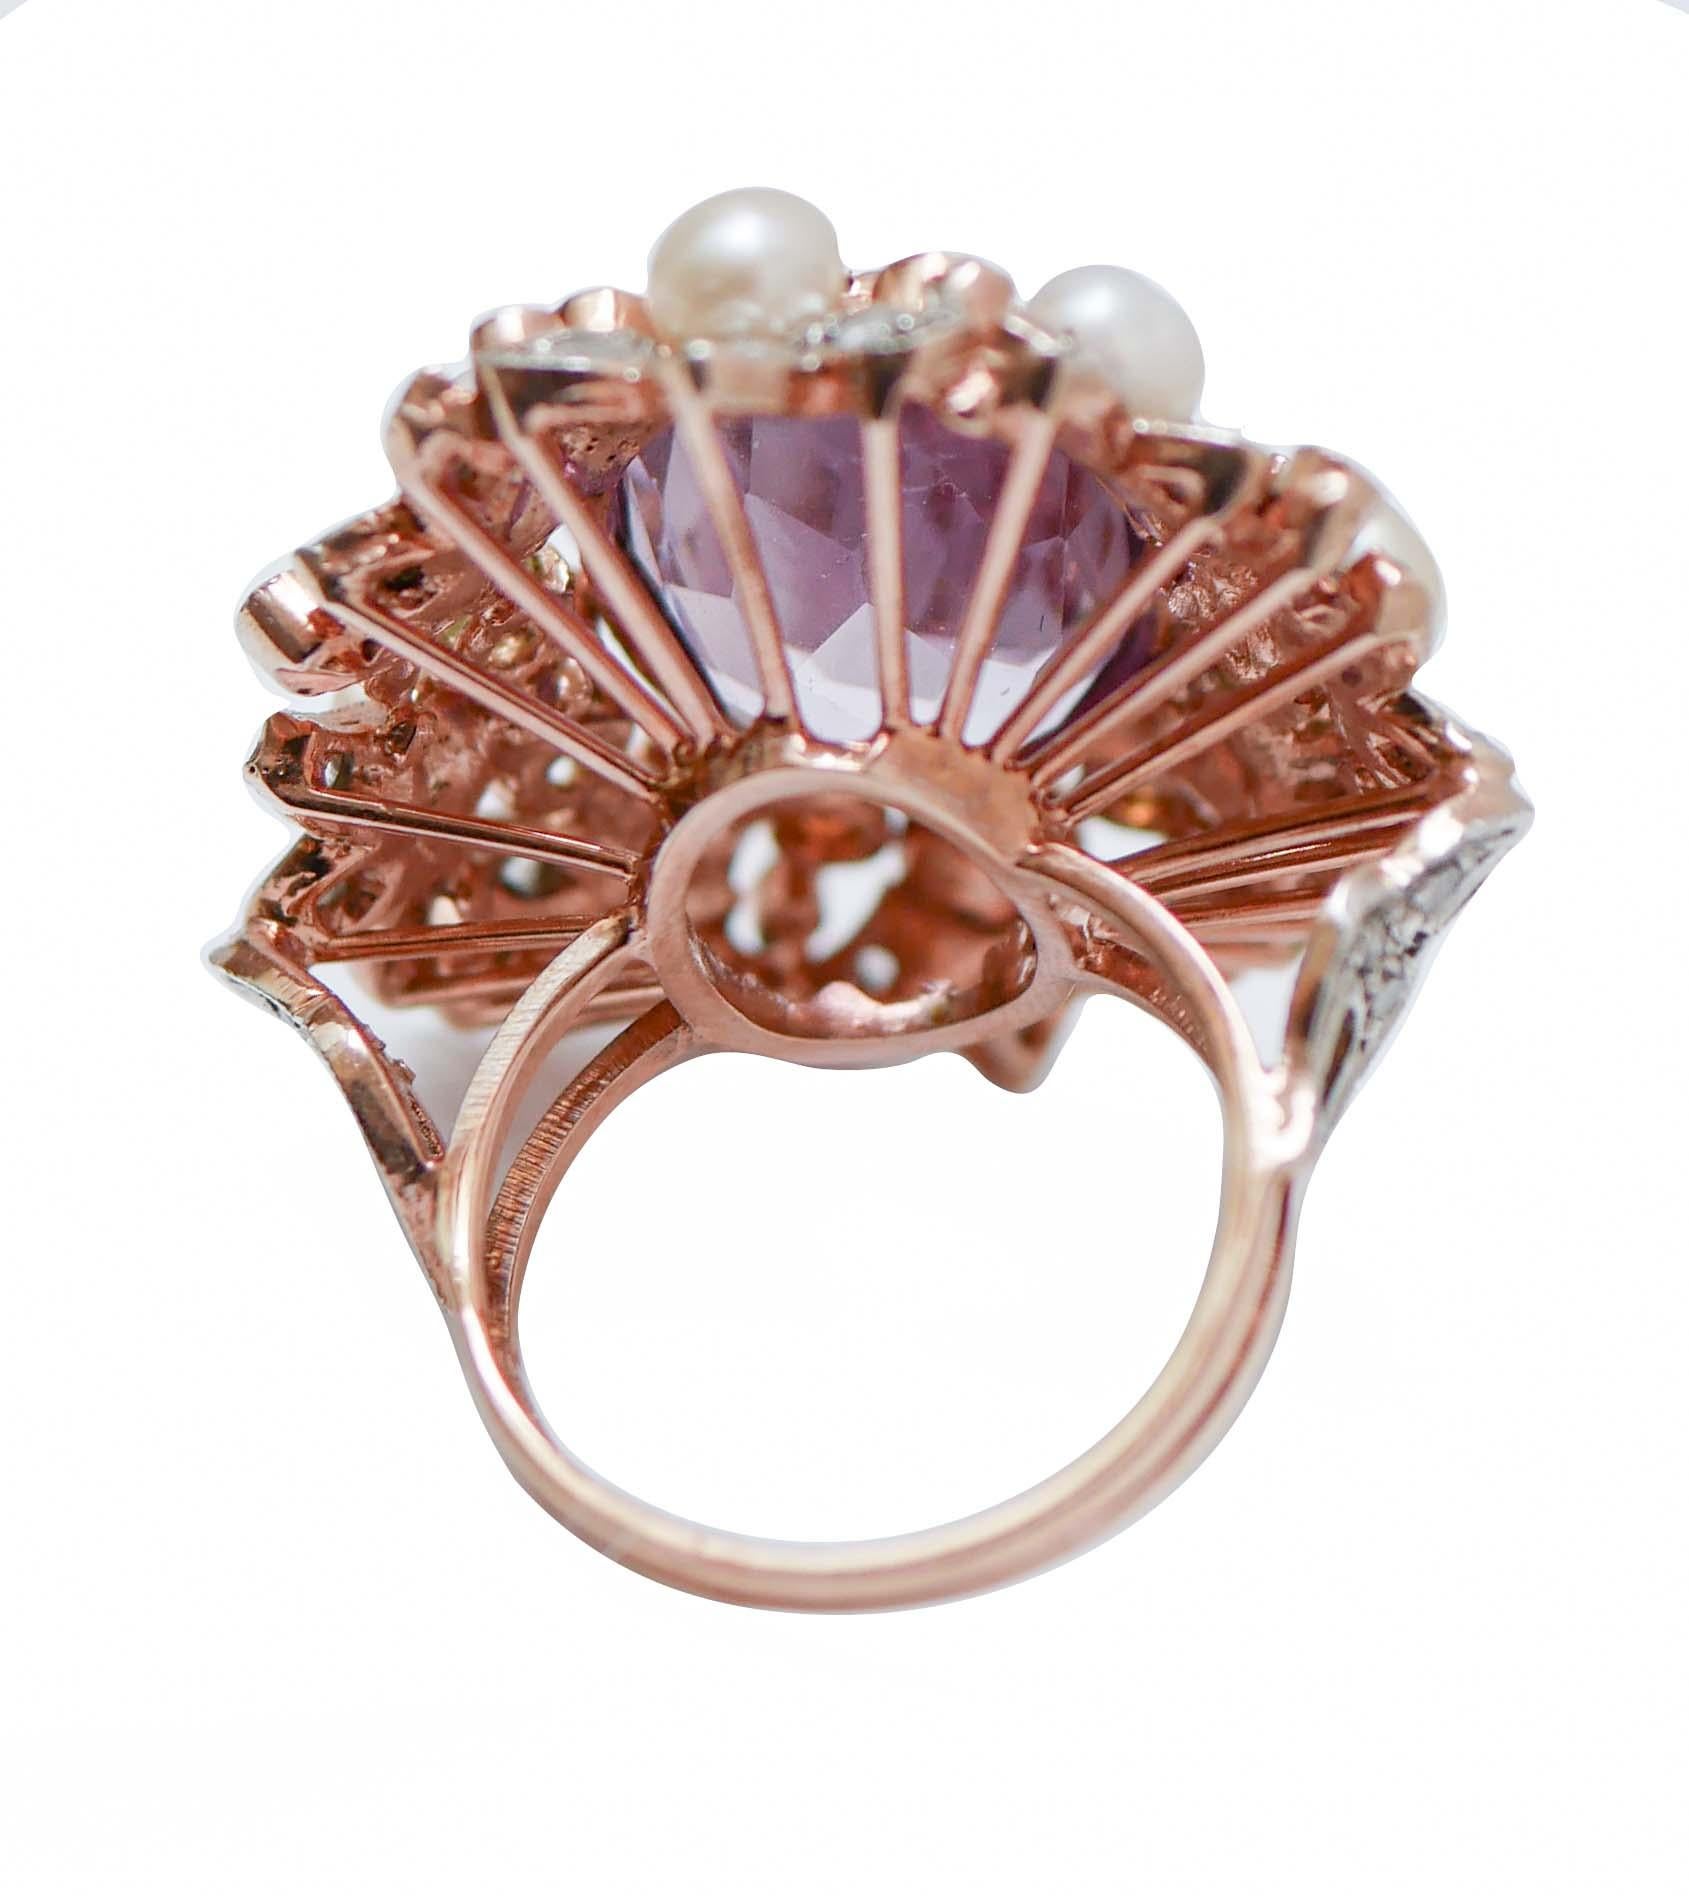 Retro Amethysts, Peridots, Topazs, Diamonds, Pearls, 14 Kt Rose Gold and Silver Ring. For Sale